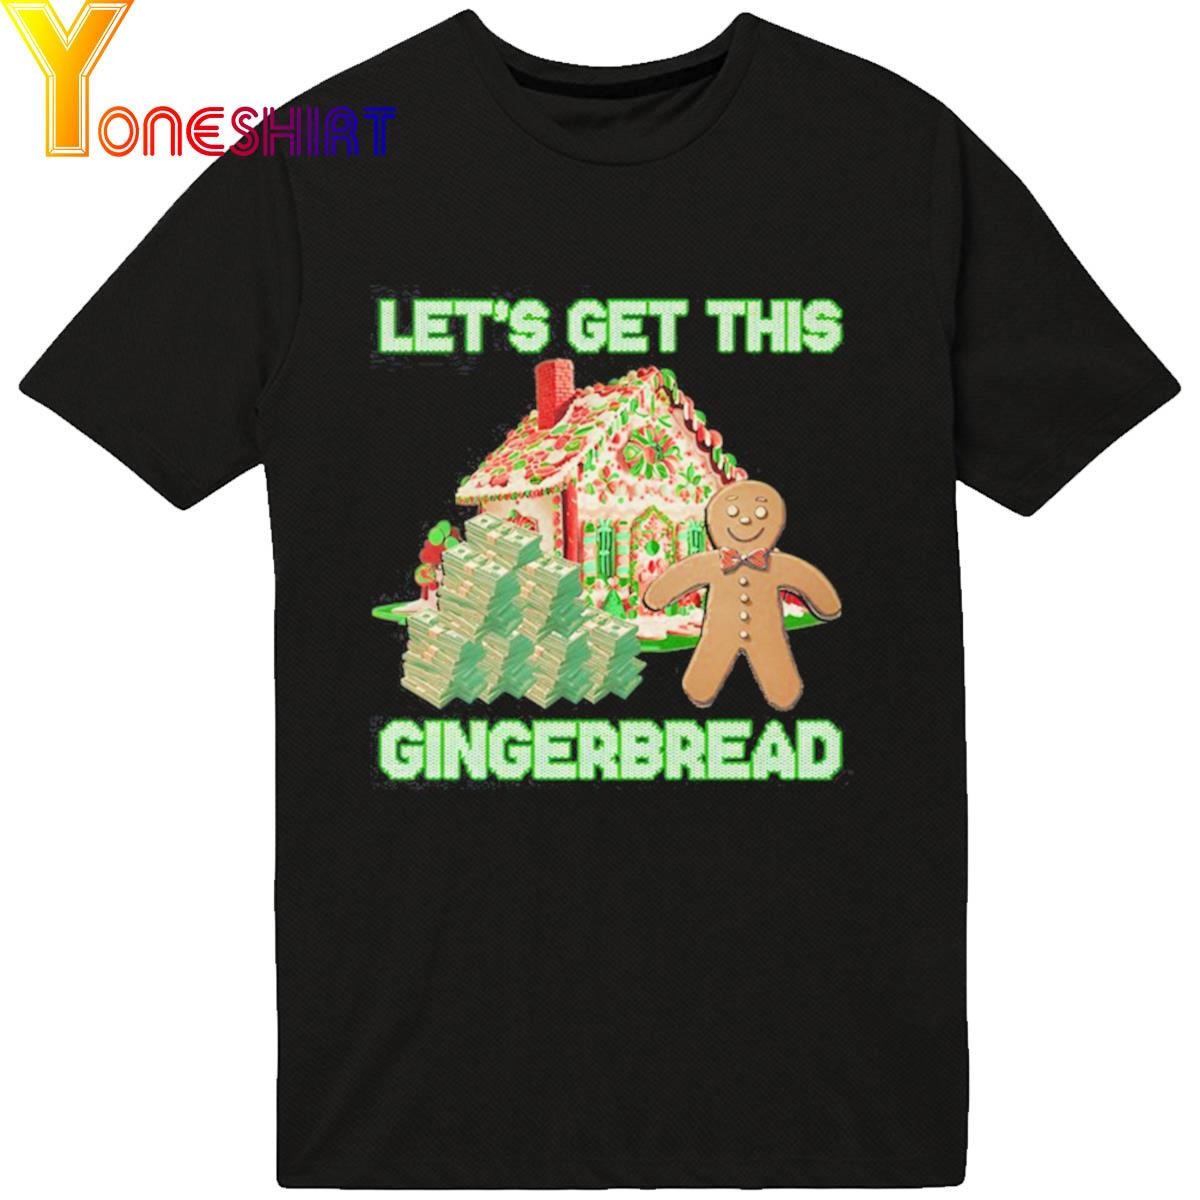 Let's Get This Gingerbread Tacky sweater